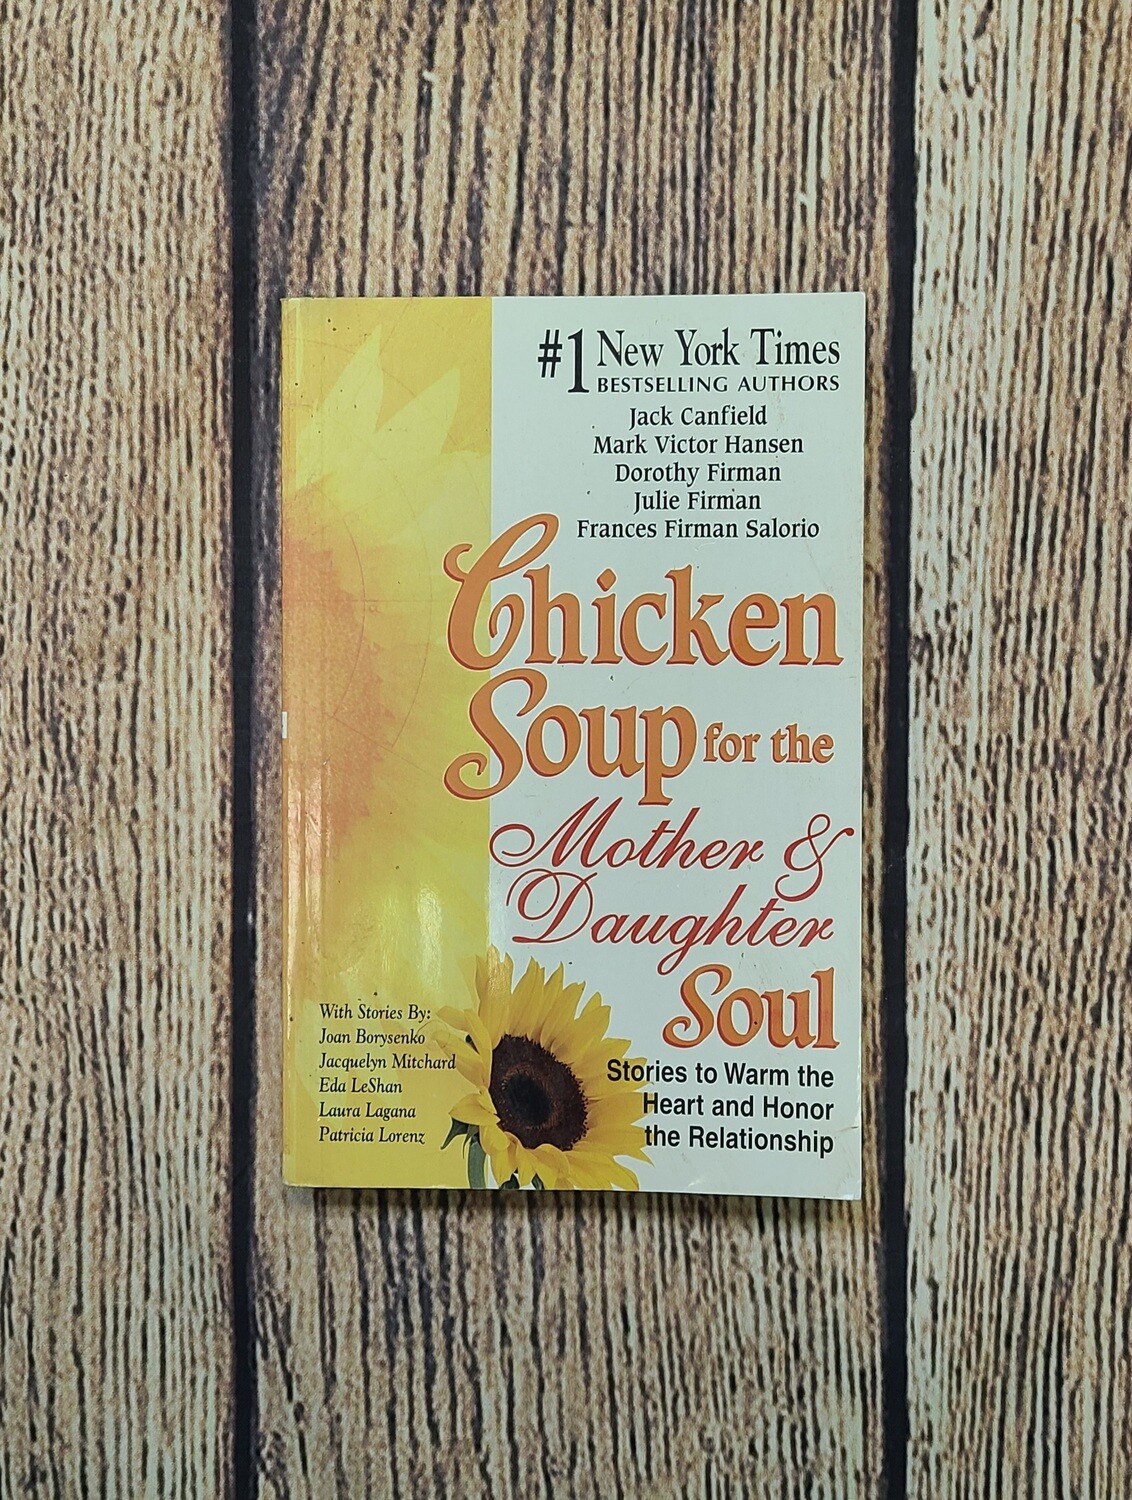 Chicken Soup for the Mother and Daughter's Soul by Jack Canfield, Mark Victor Hansen, Dorothy Firman, Julie Firman, and Frances Firman Salorio